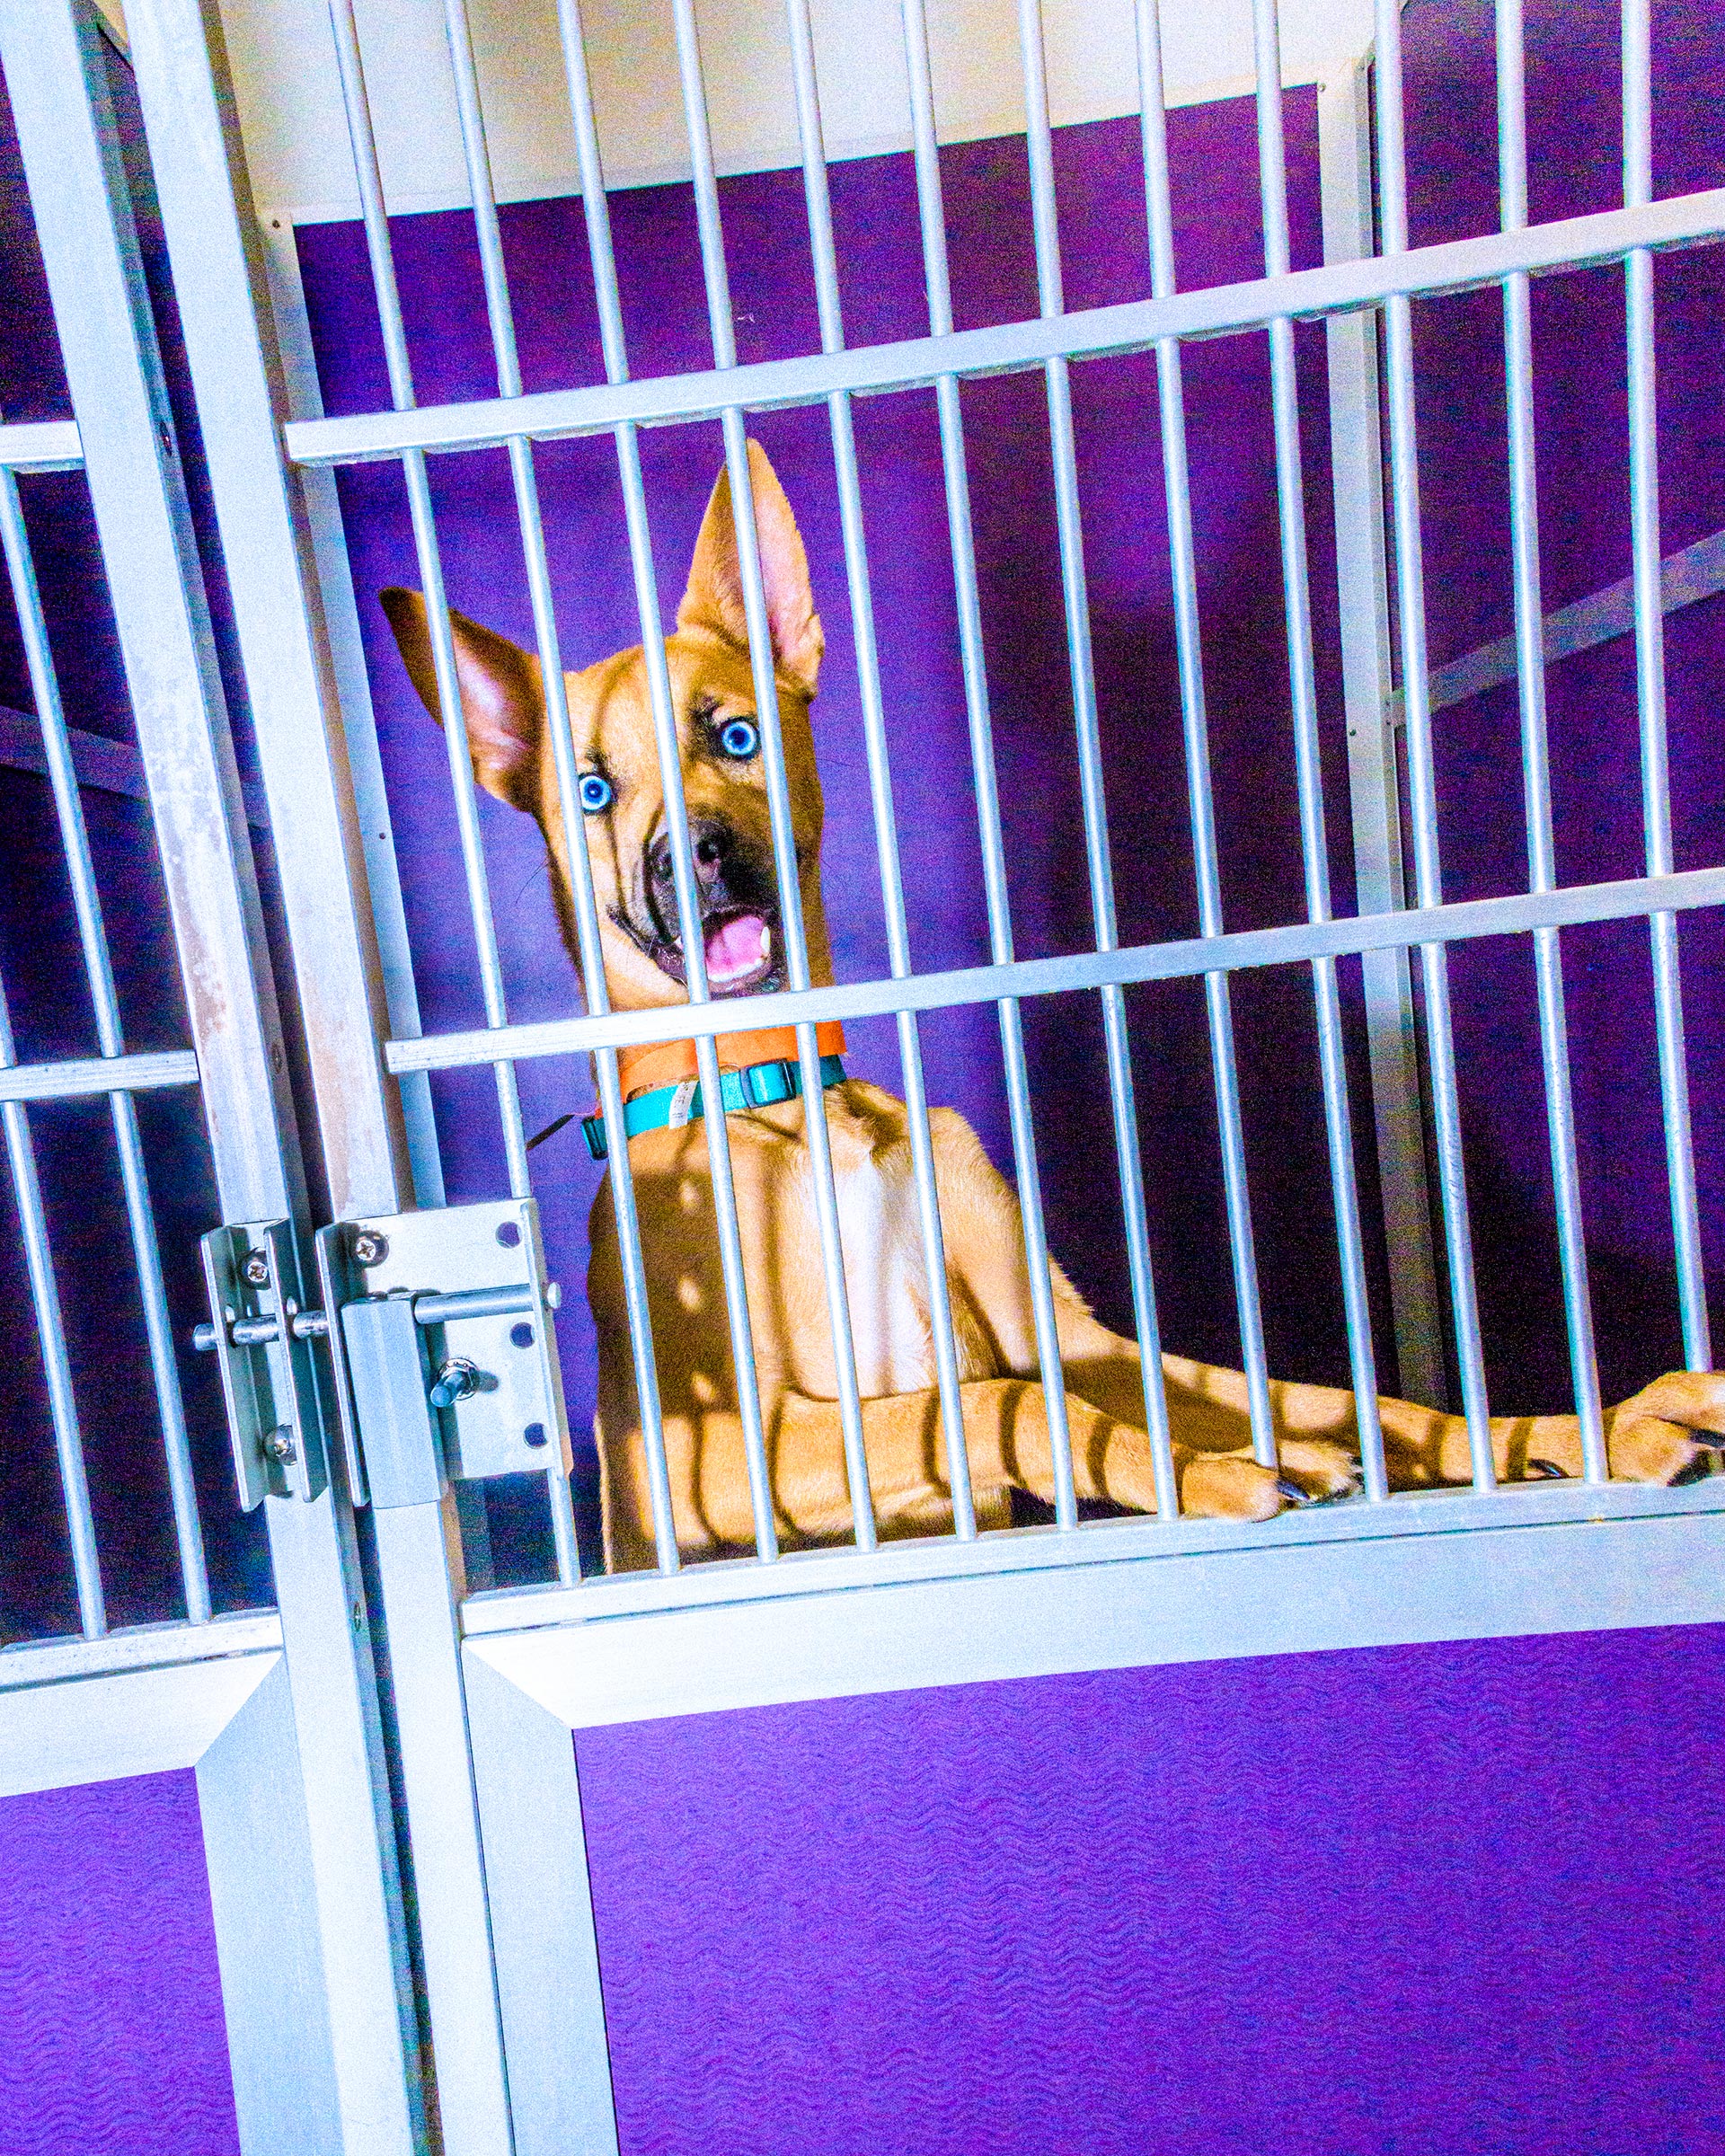 How America Saved Millions of Dogs—By Moving Them